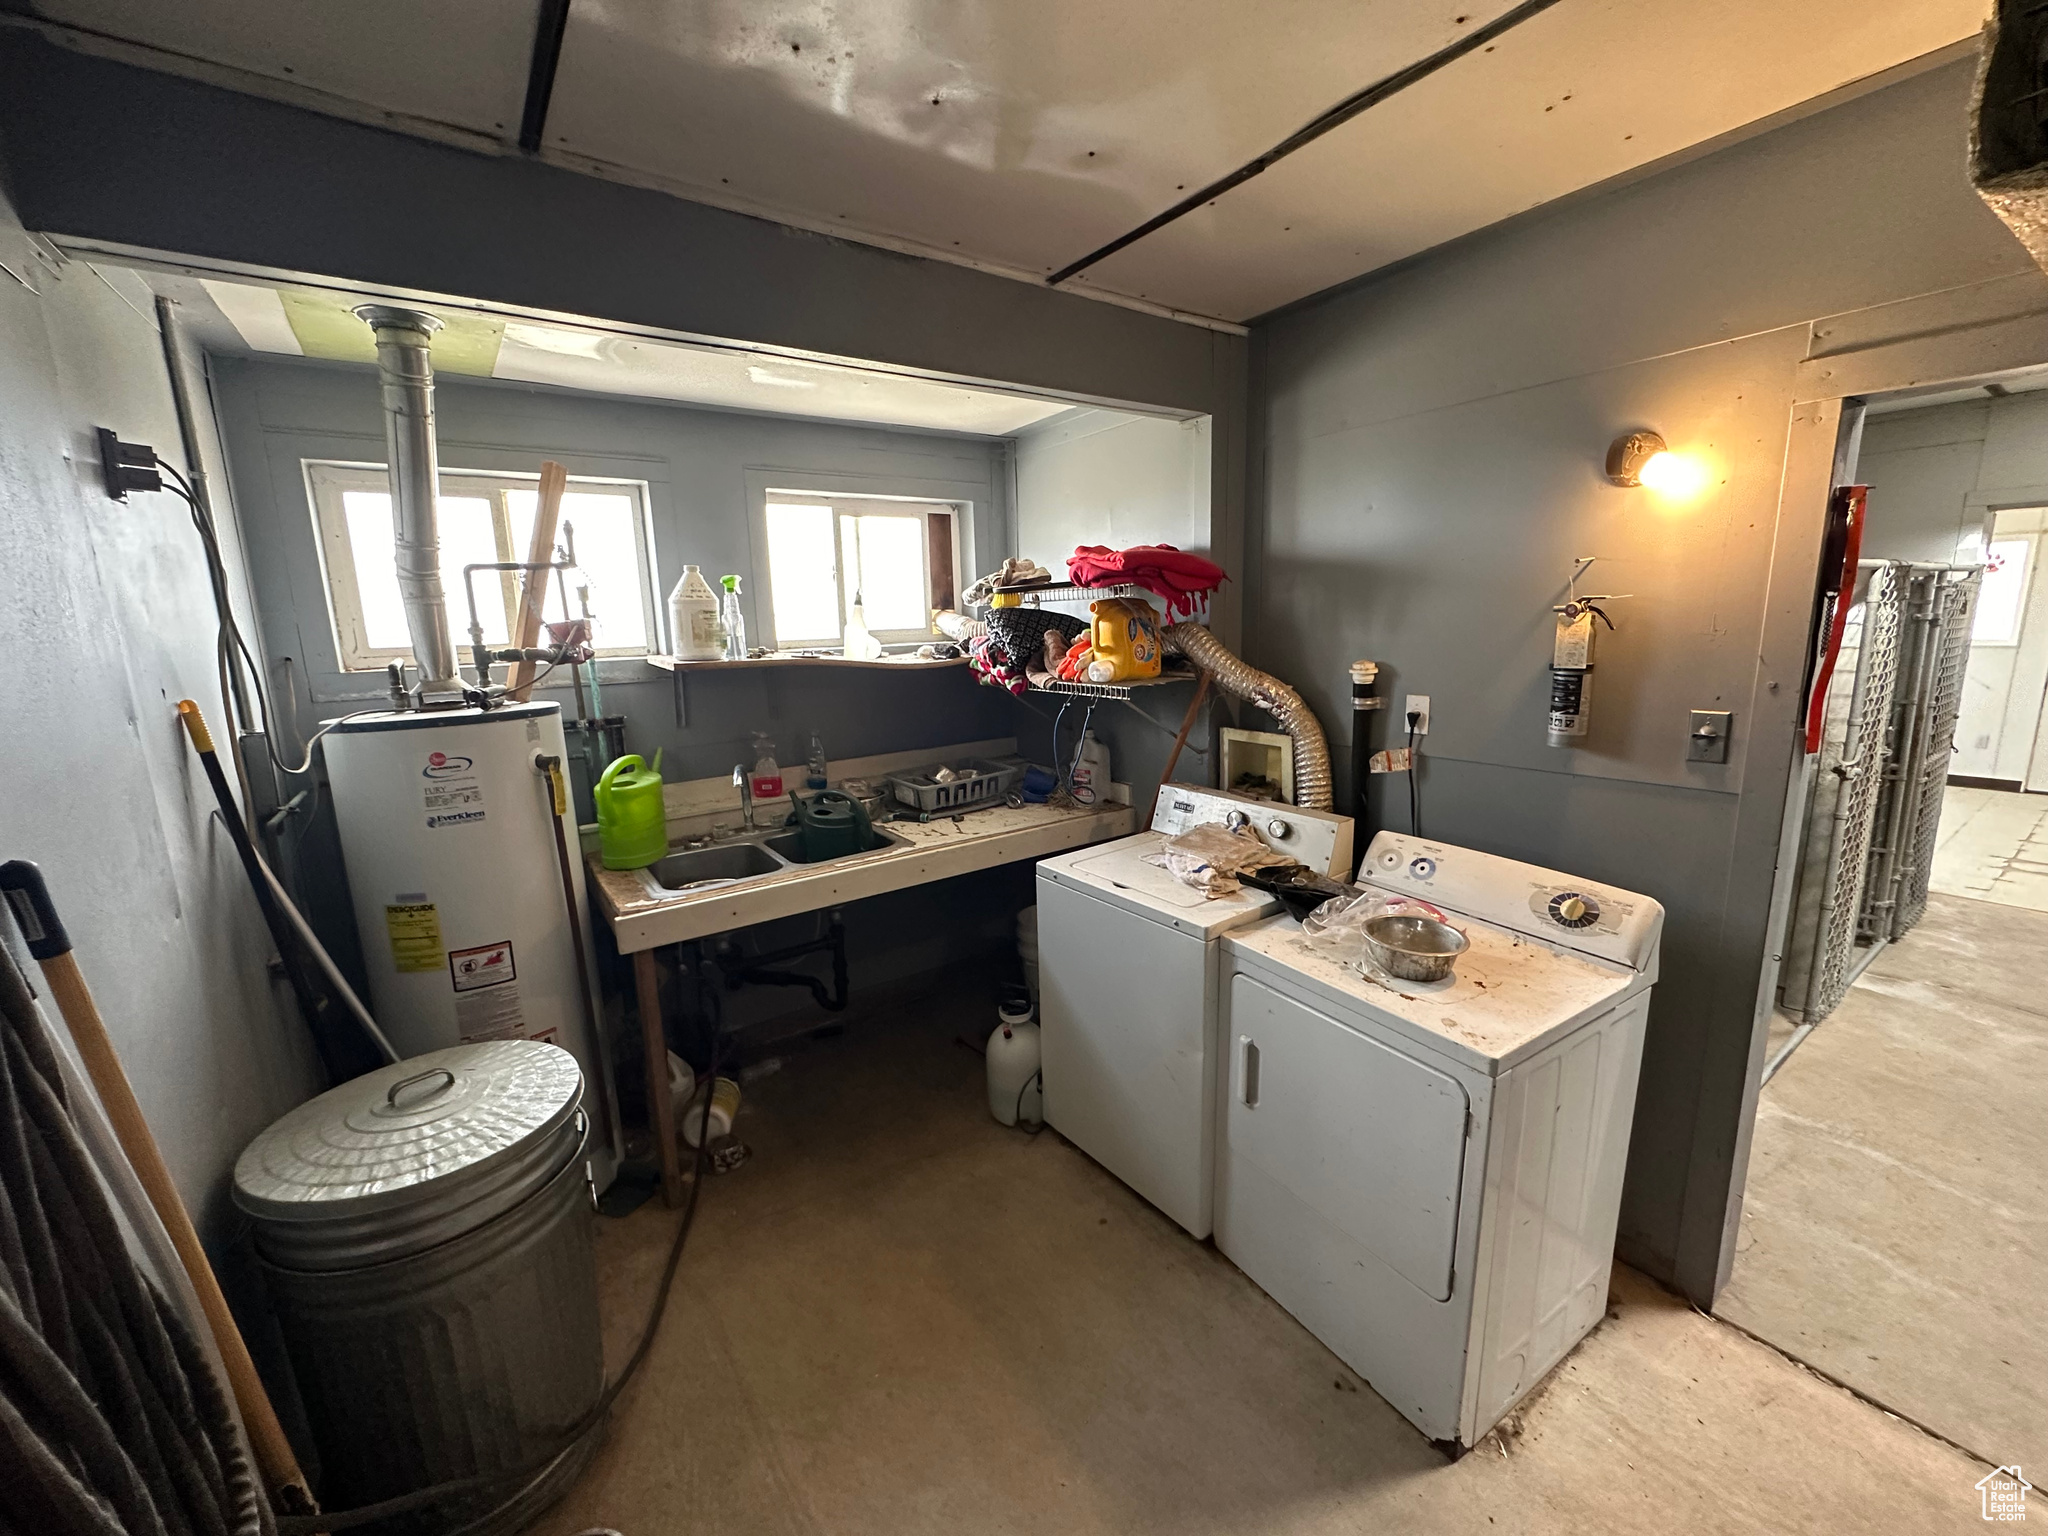 Laundry room with washer and dryer, washer hookup, and gas water heater